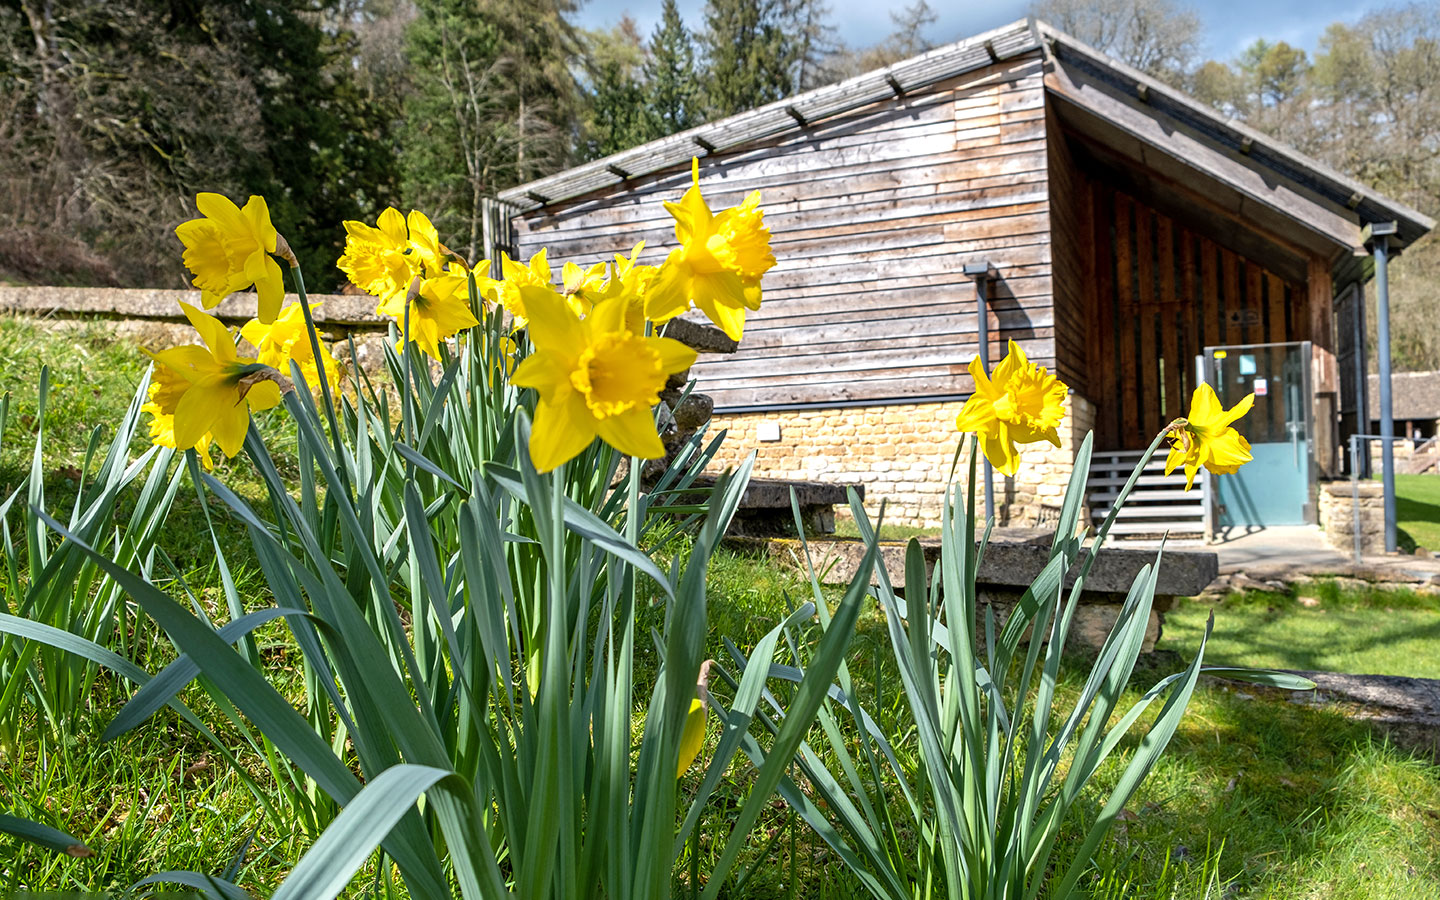 The shelter covering the West Range and daffodils